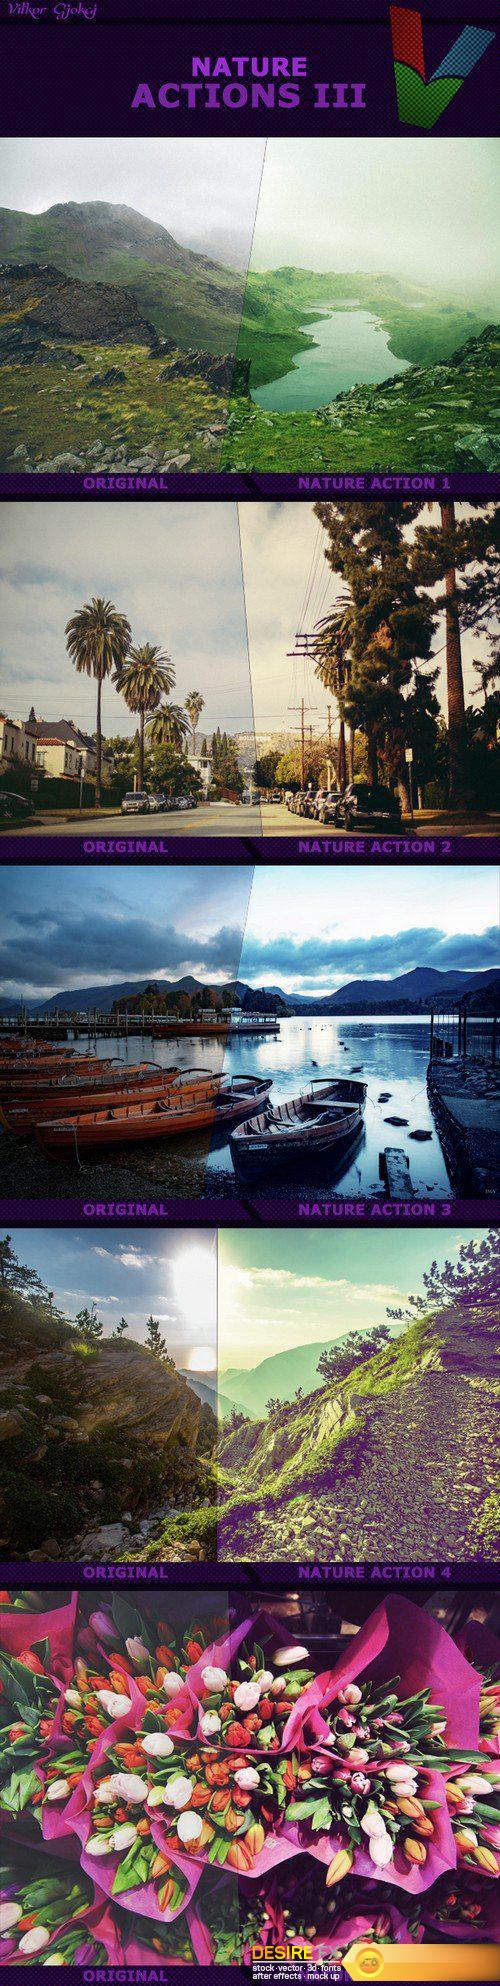 Graphicriver - Nature Actions III 15222022